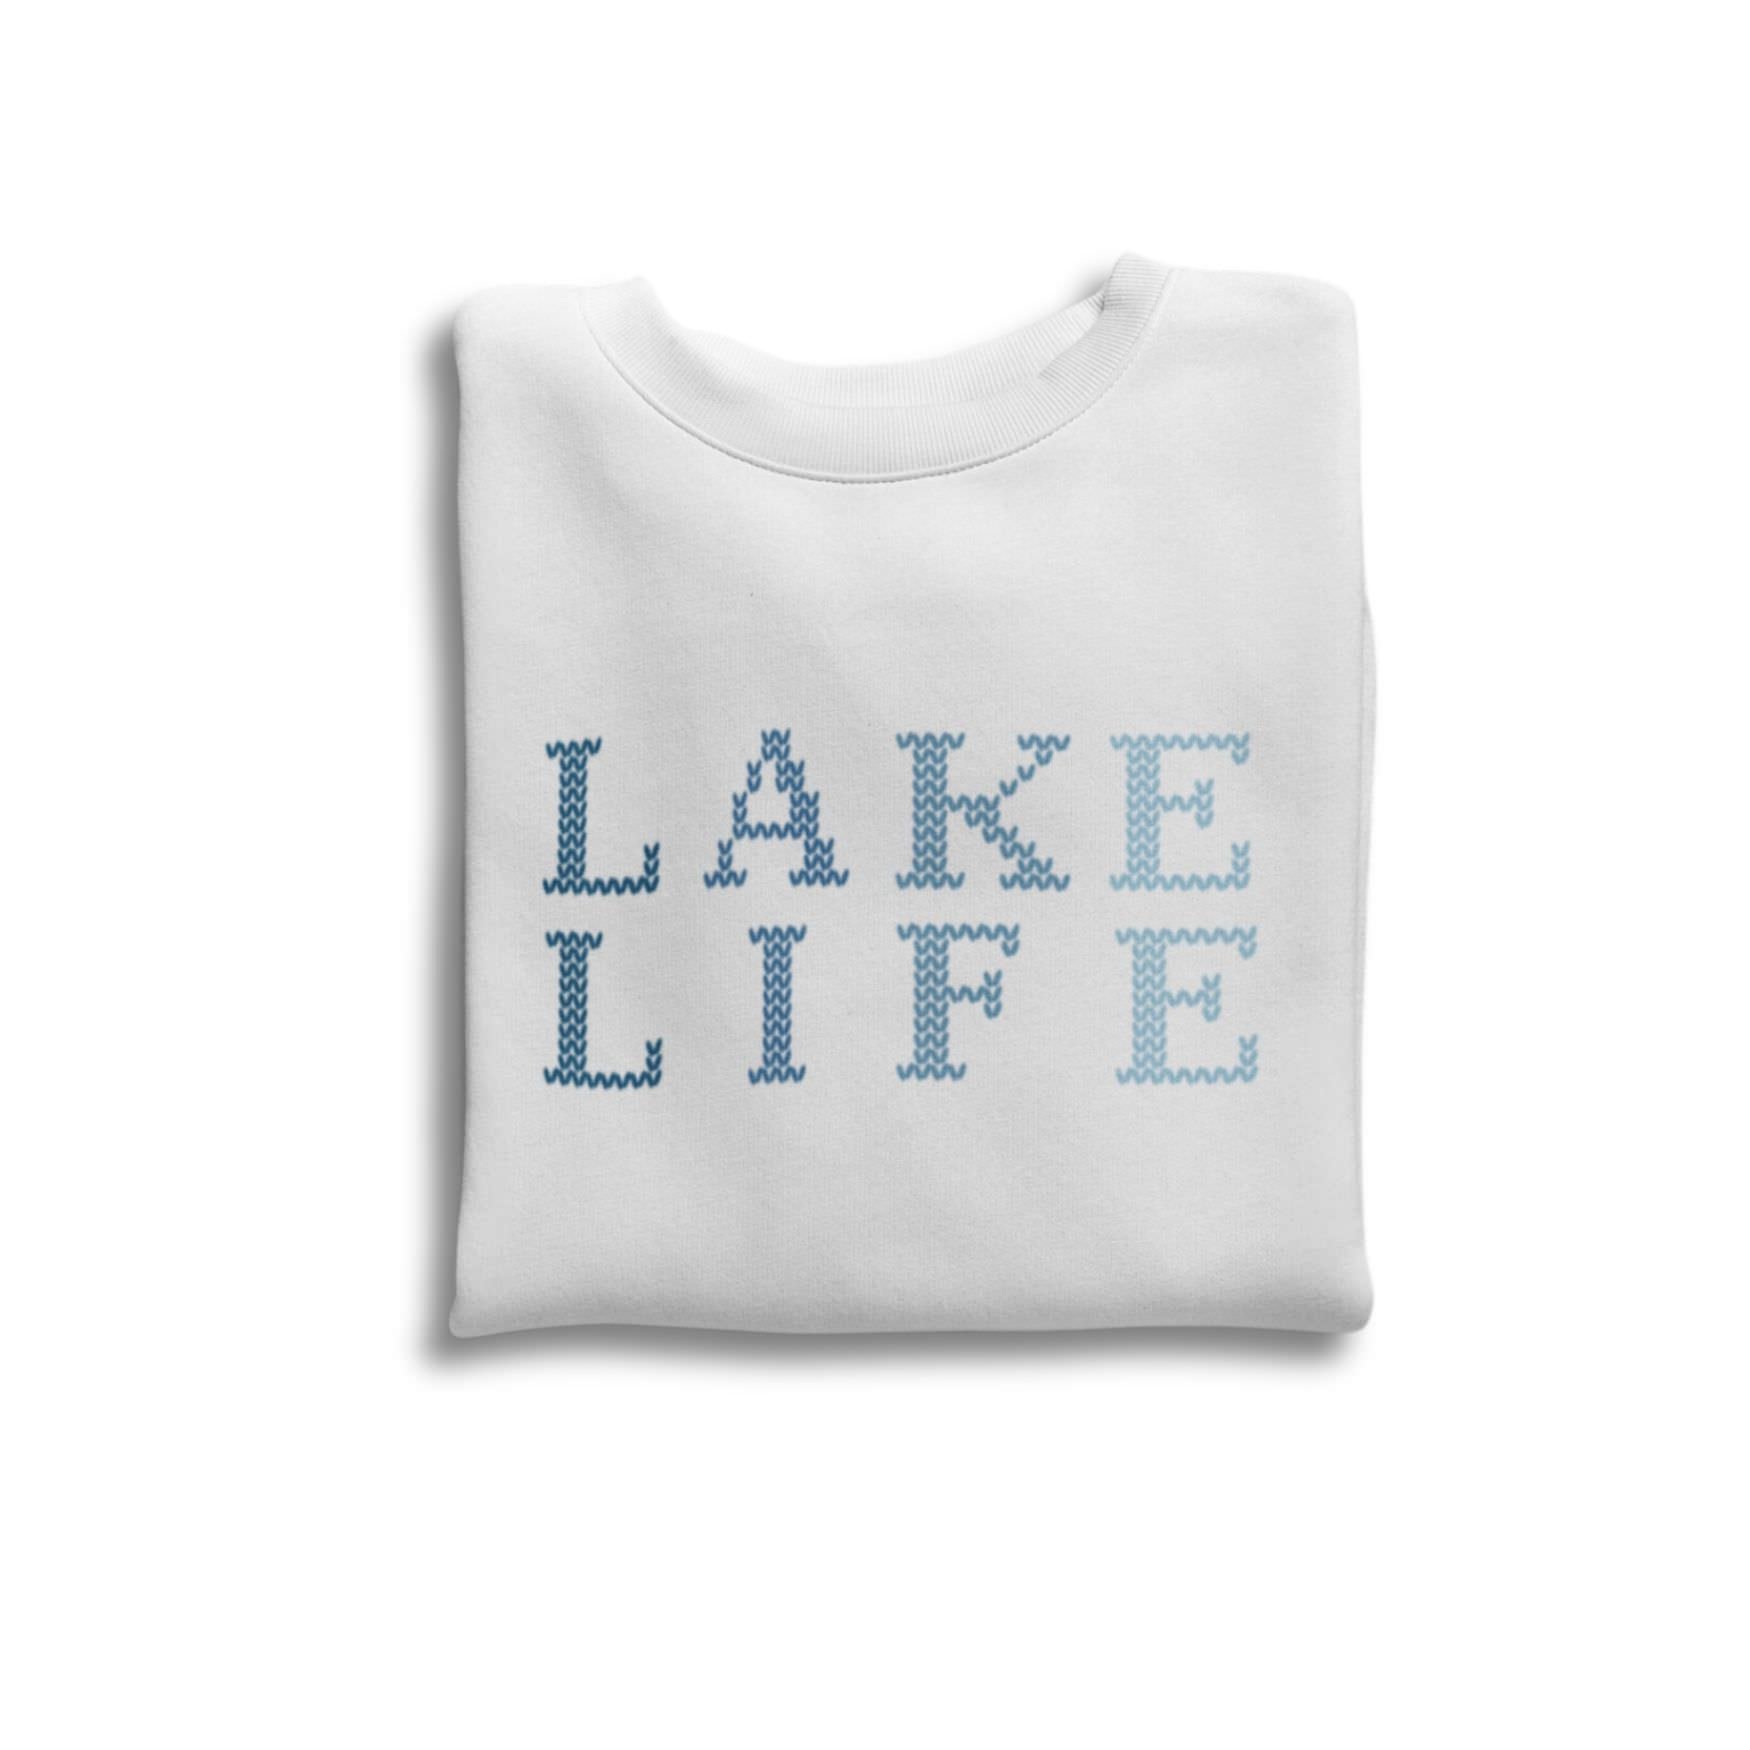 Lake Life Shirts with Knit Letters